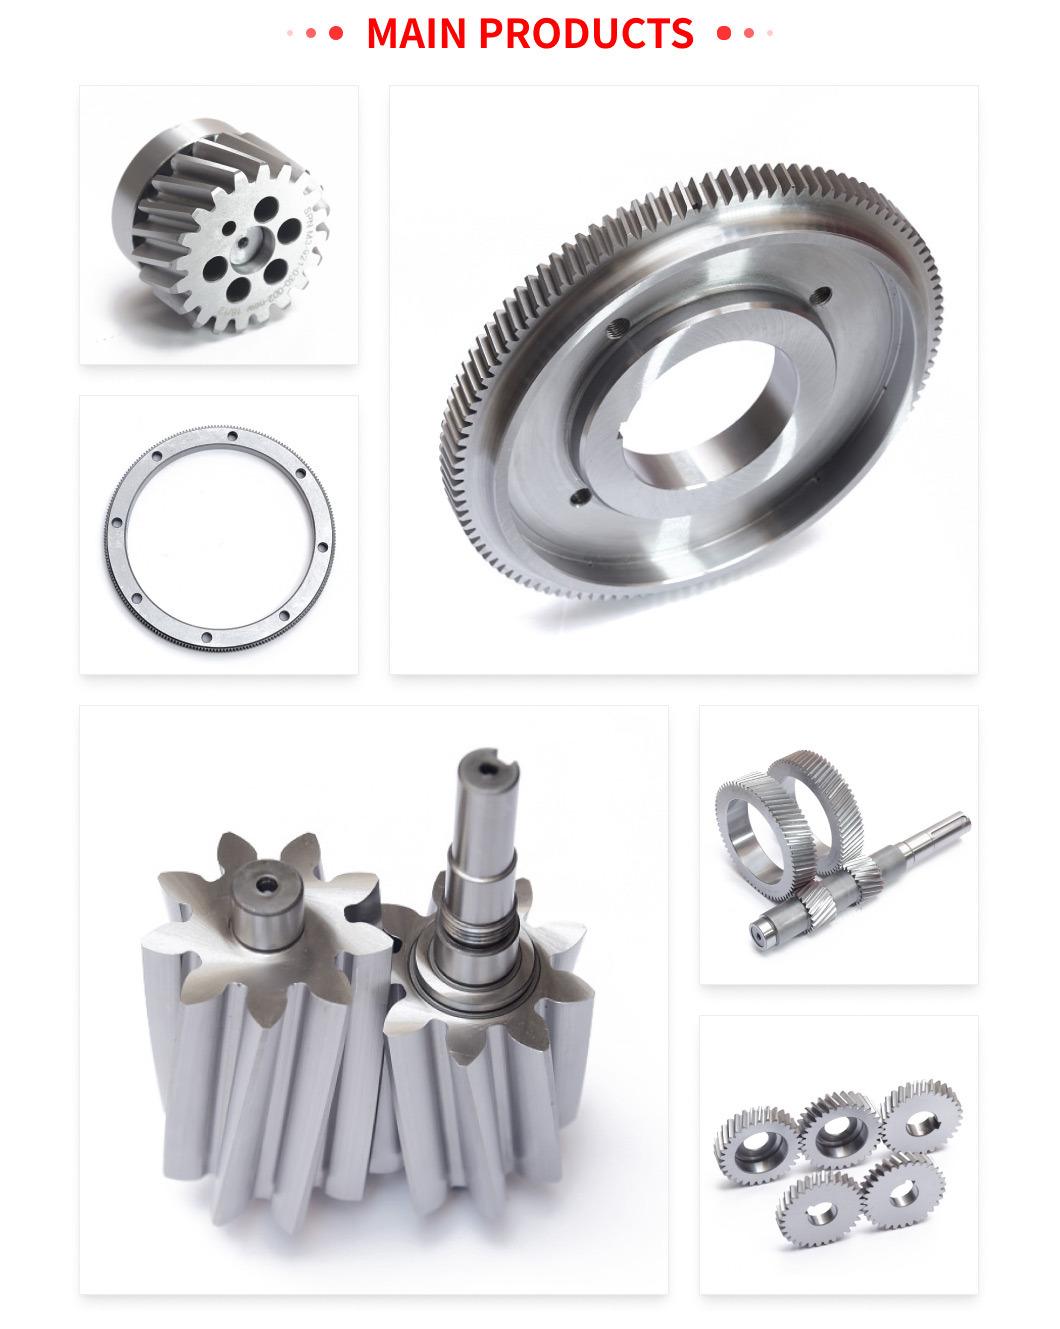 Machinery Agricultural OEM Spur Transmission Cement Mixer Hard Helical Gear with Low Price